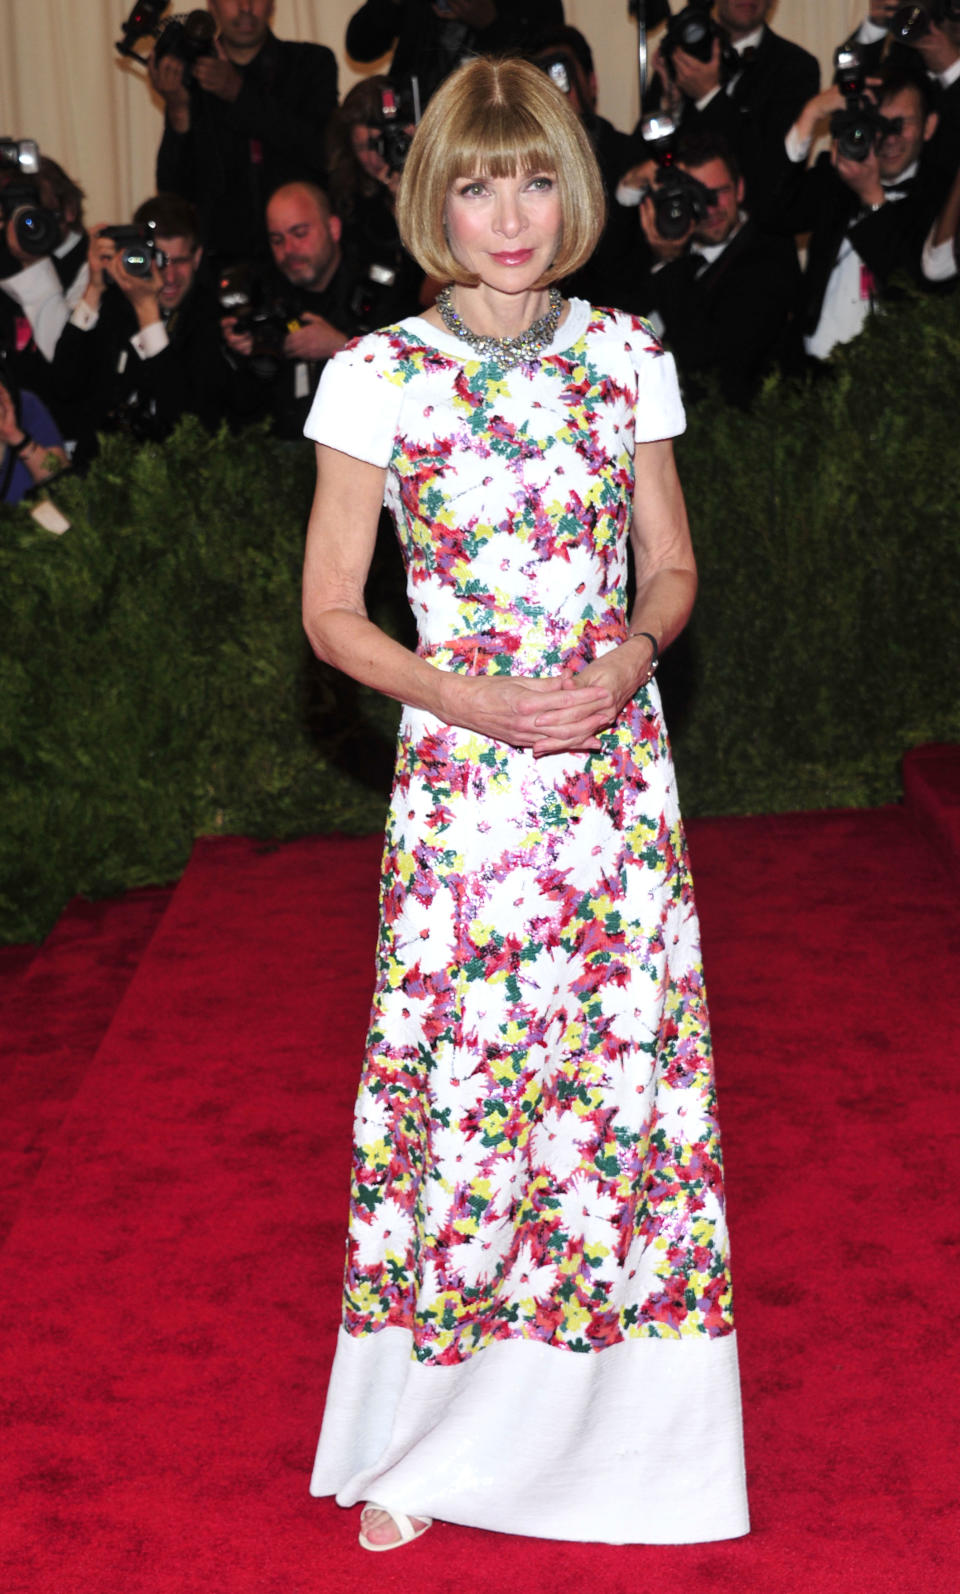 Anna Wintour attends The Metropolitan Museum of Art's Costume Institute benefit celebrating "PUNK: Chaos to Couture" on Monday May 6, 2013 in New York. (Photo by Charles Sykes/Invision/AP)